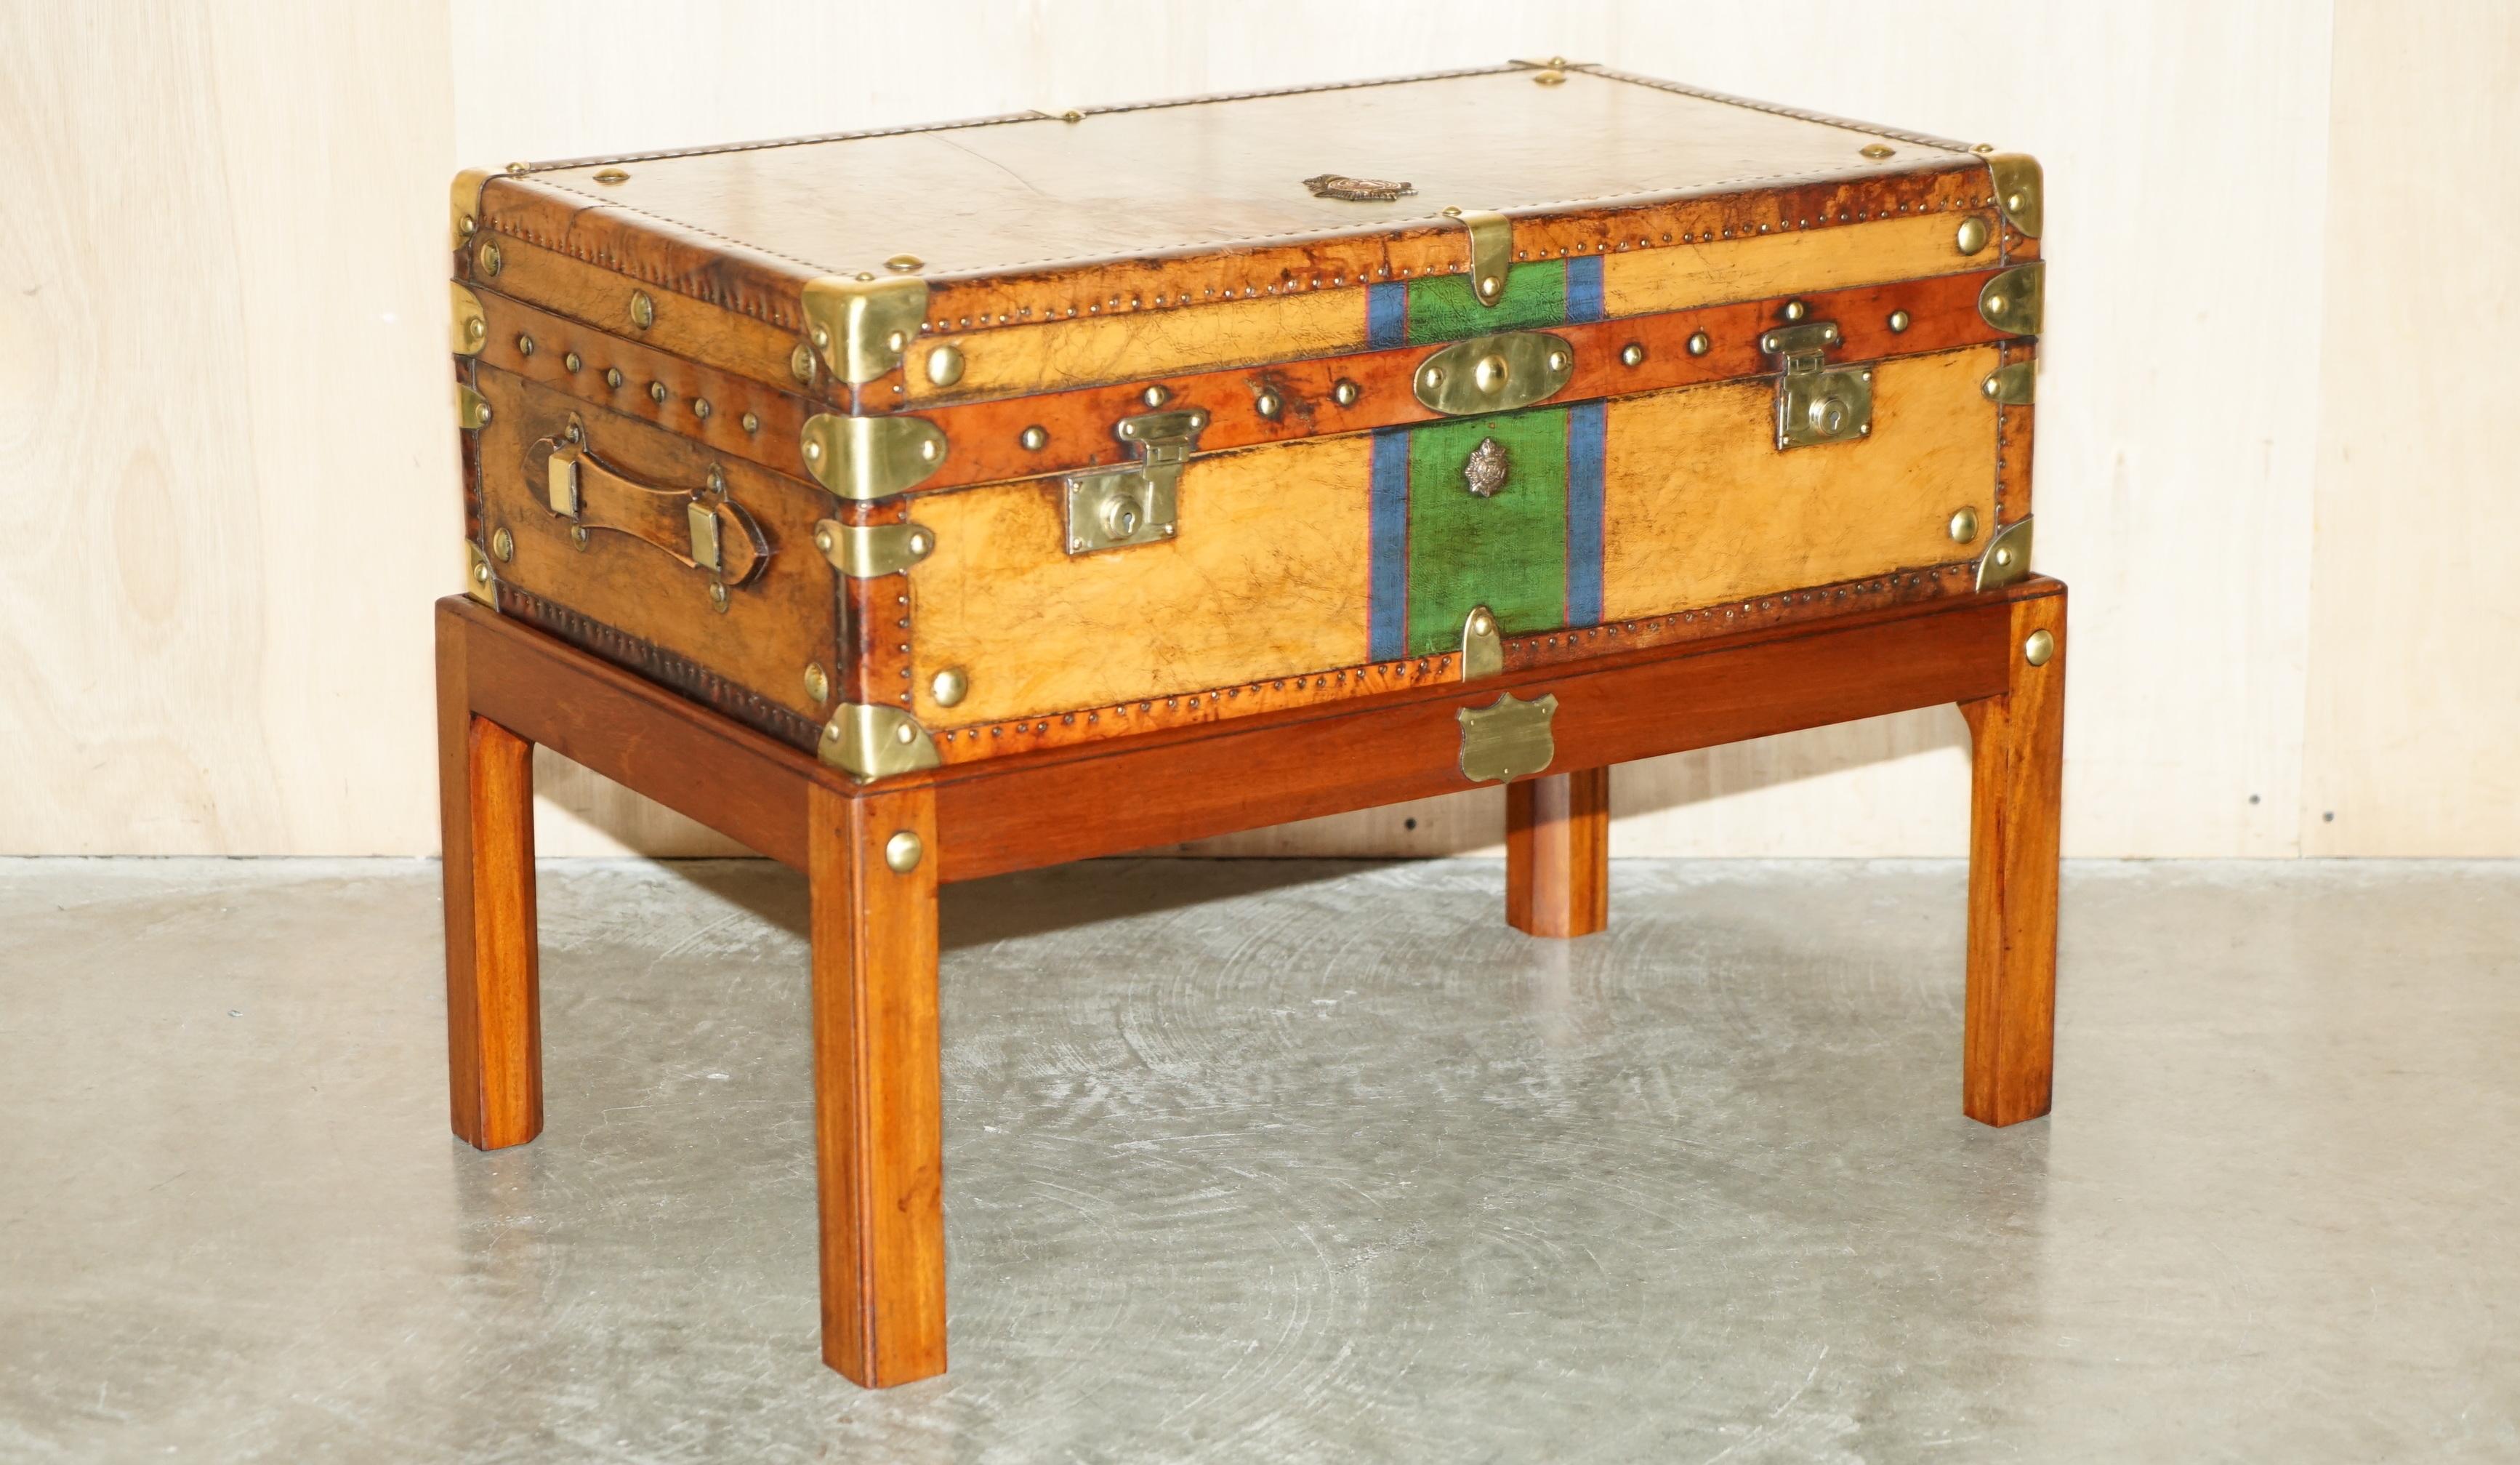 Hand-Crafted RESTORED BRITISH ARMY BROWN LEATHER TRUNK COFFEE TABLE HONI SOIT QUI MAL Y PENSe For Sale